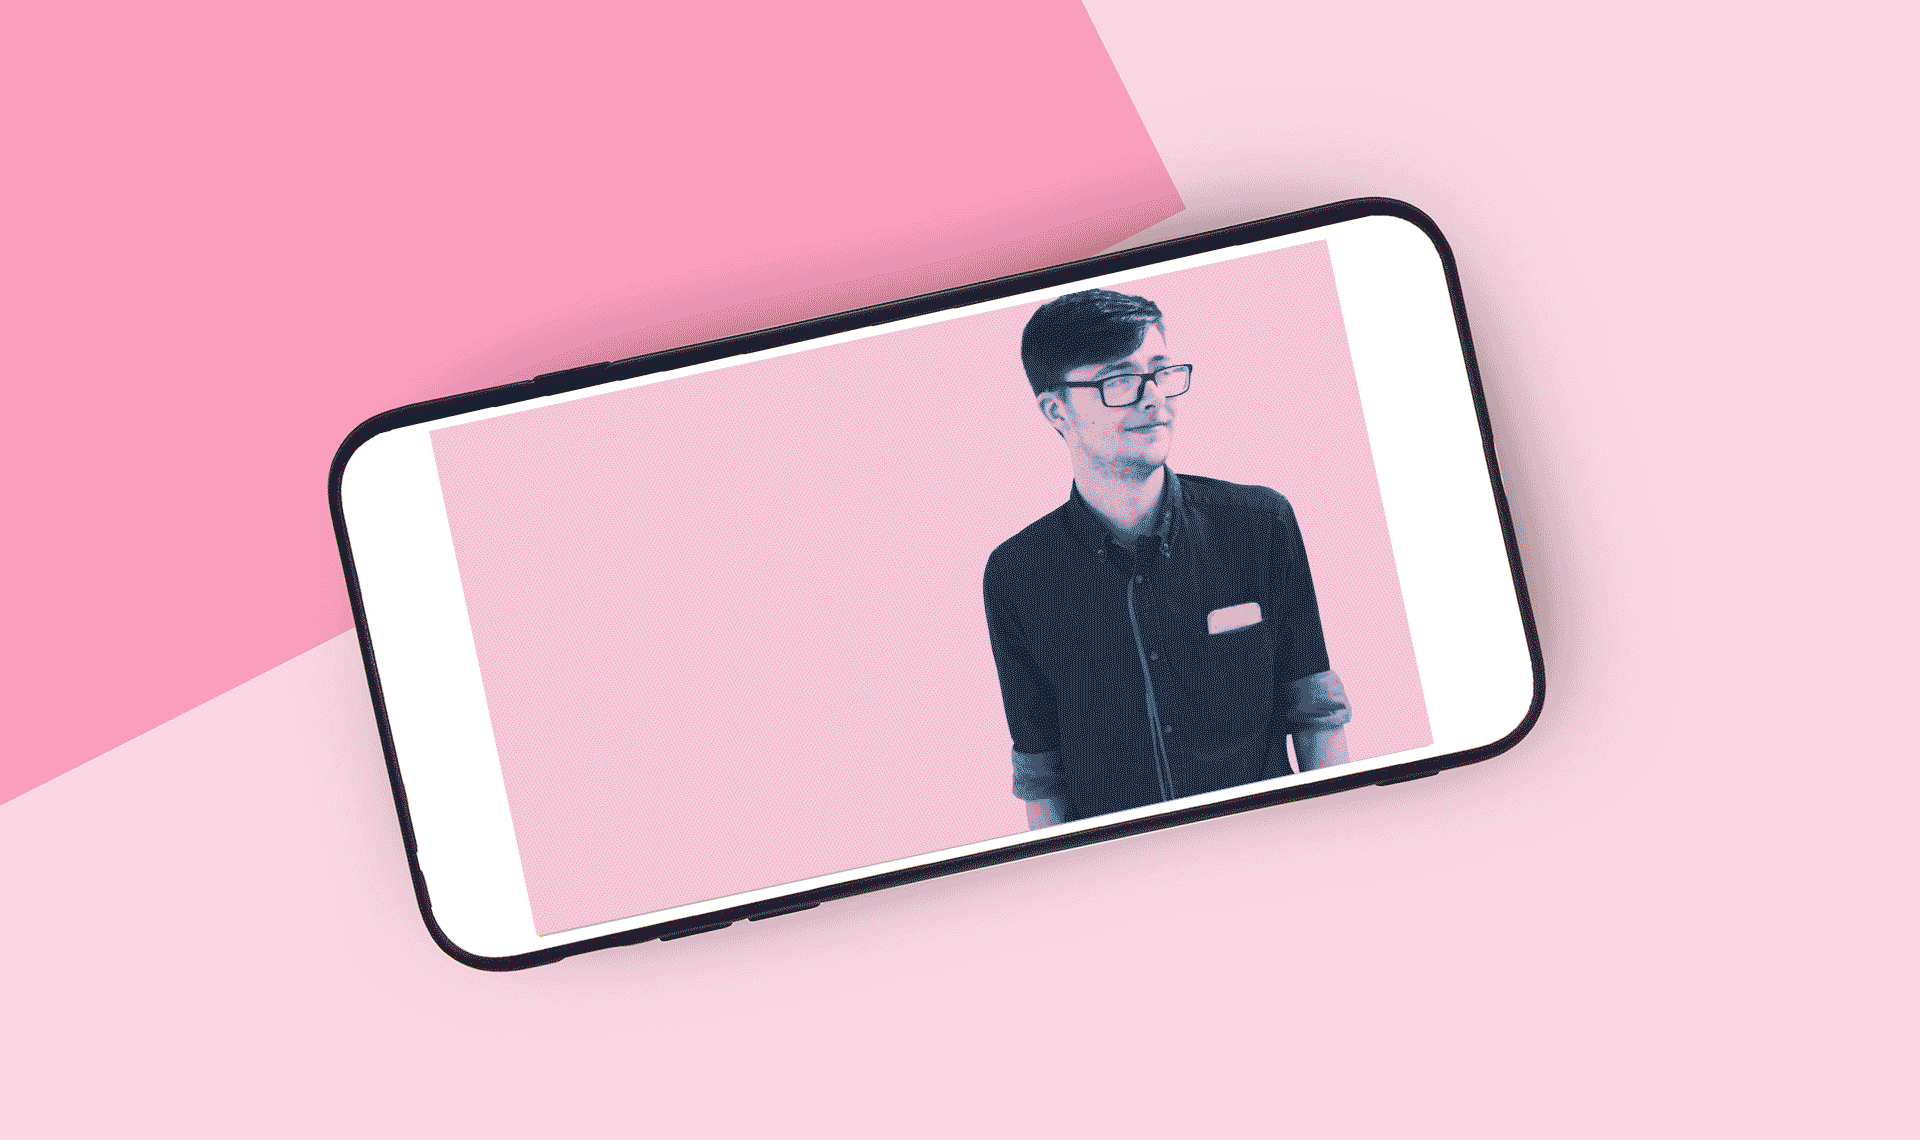 image on smartphone of young man wearing glasses set to a pink background